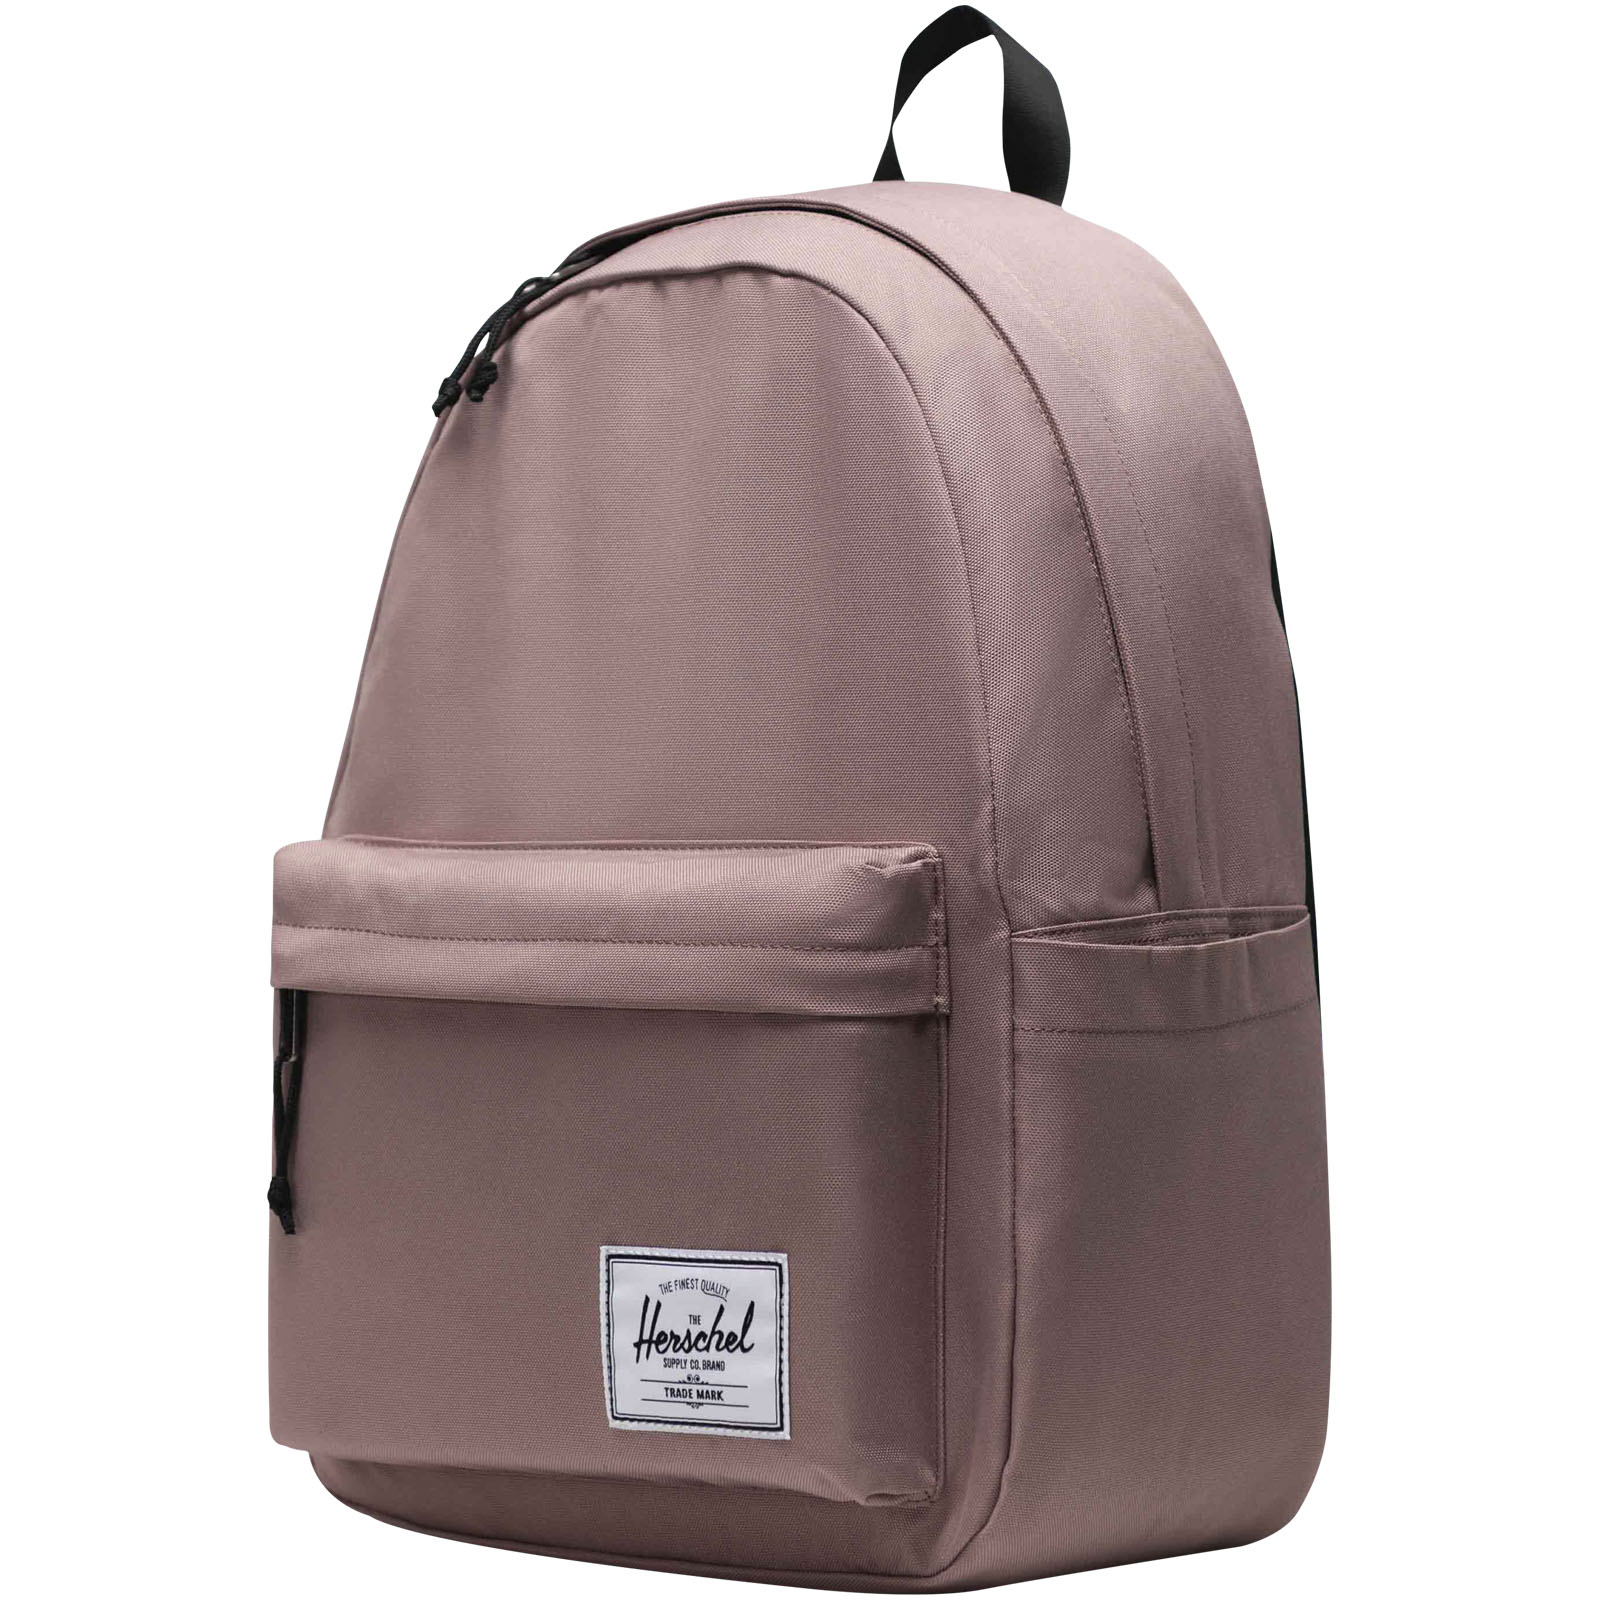 Advertising Backpacks - Herschel Classic™ recycled laptop backpack 26L - 0